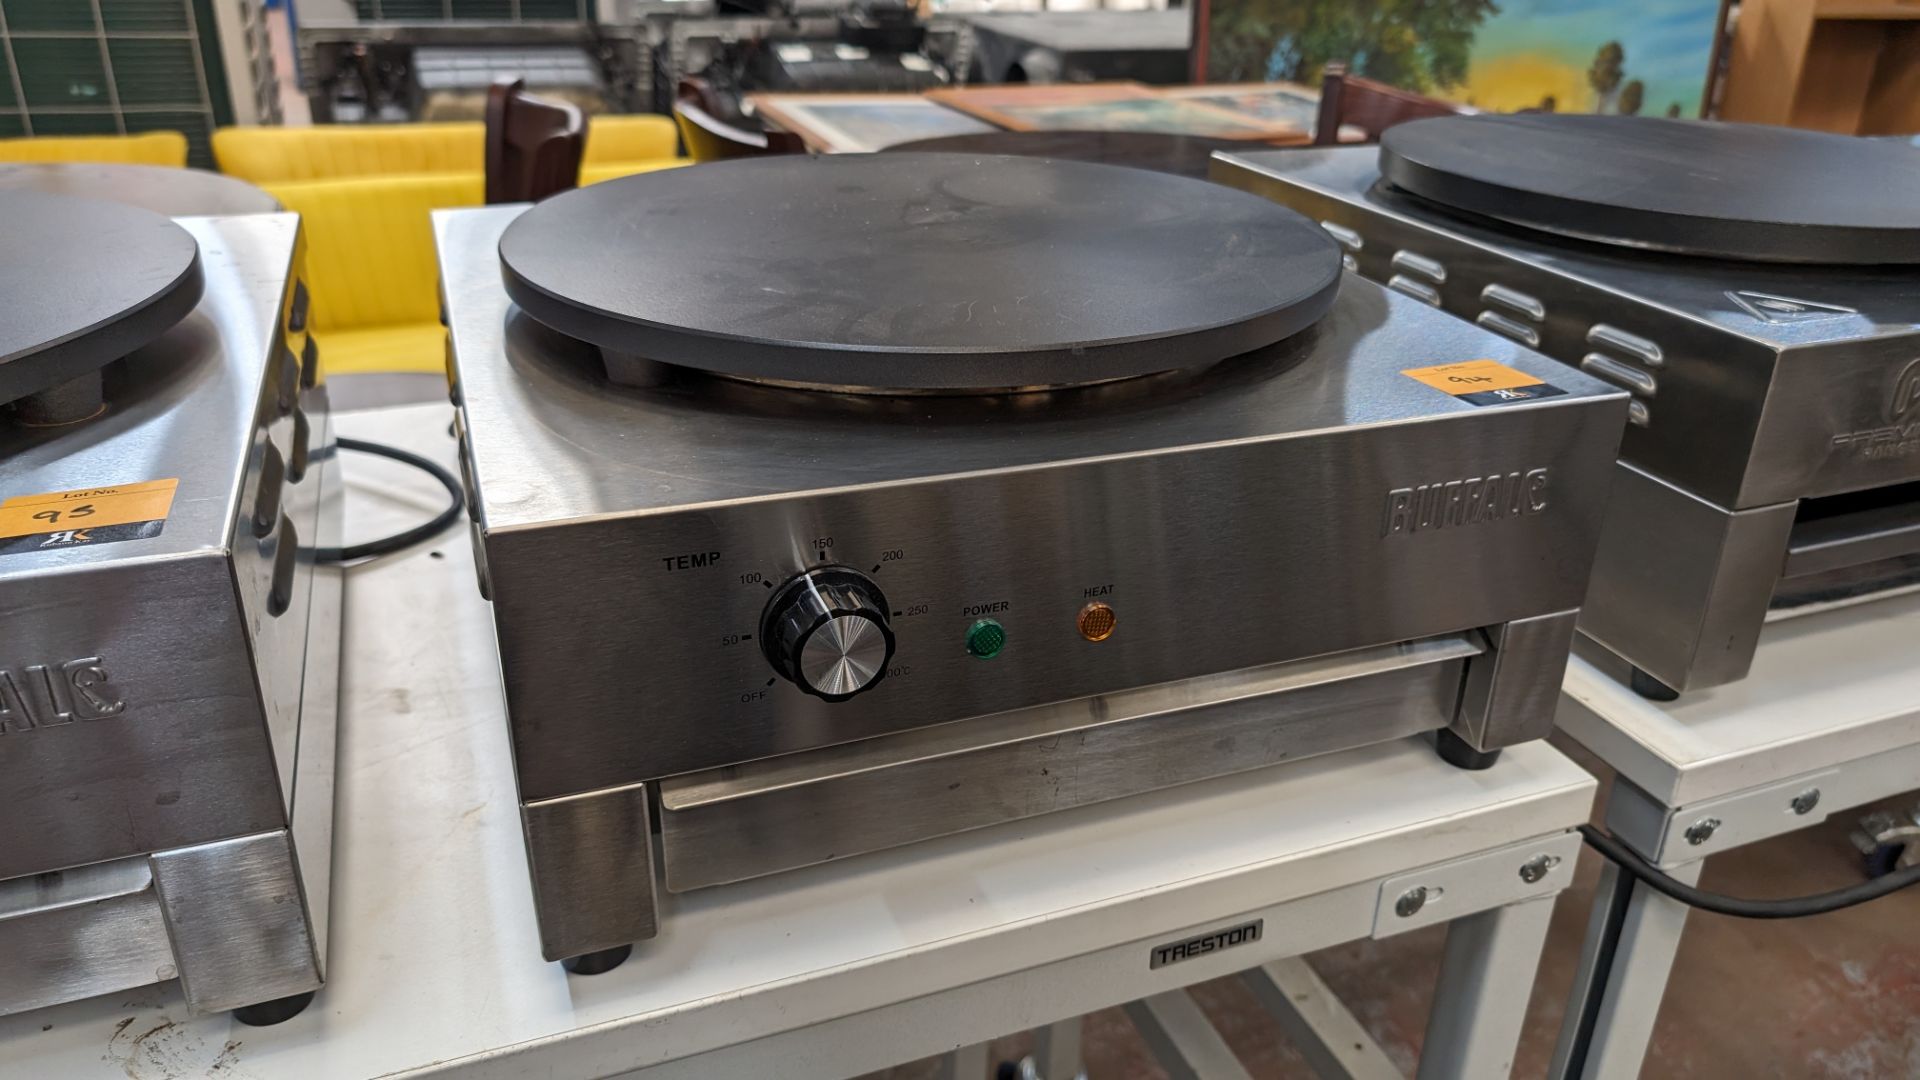 Buffalo stainless steel commercial crepe maker, model CT931 - Image 2 of 4